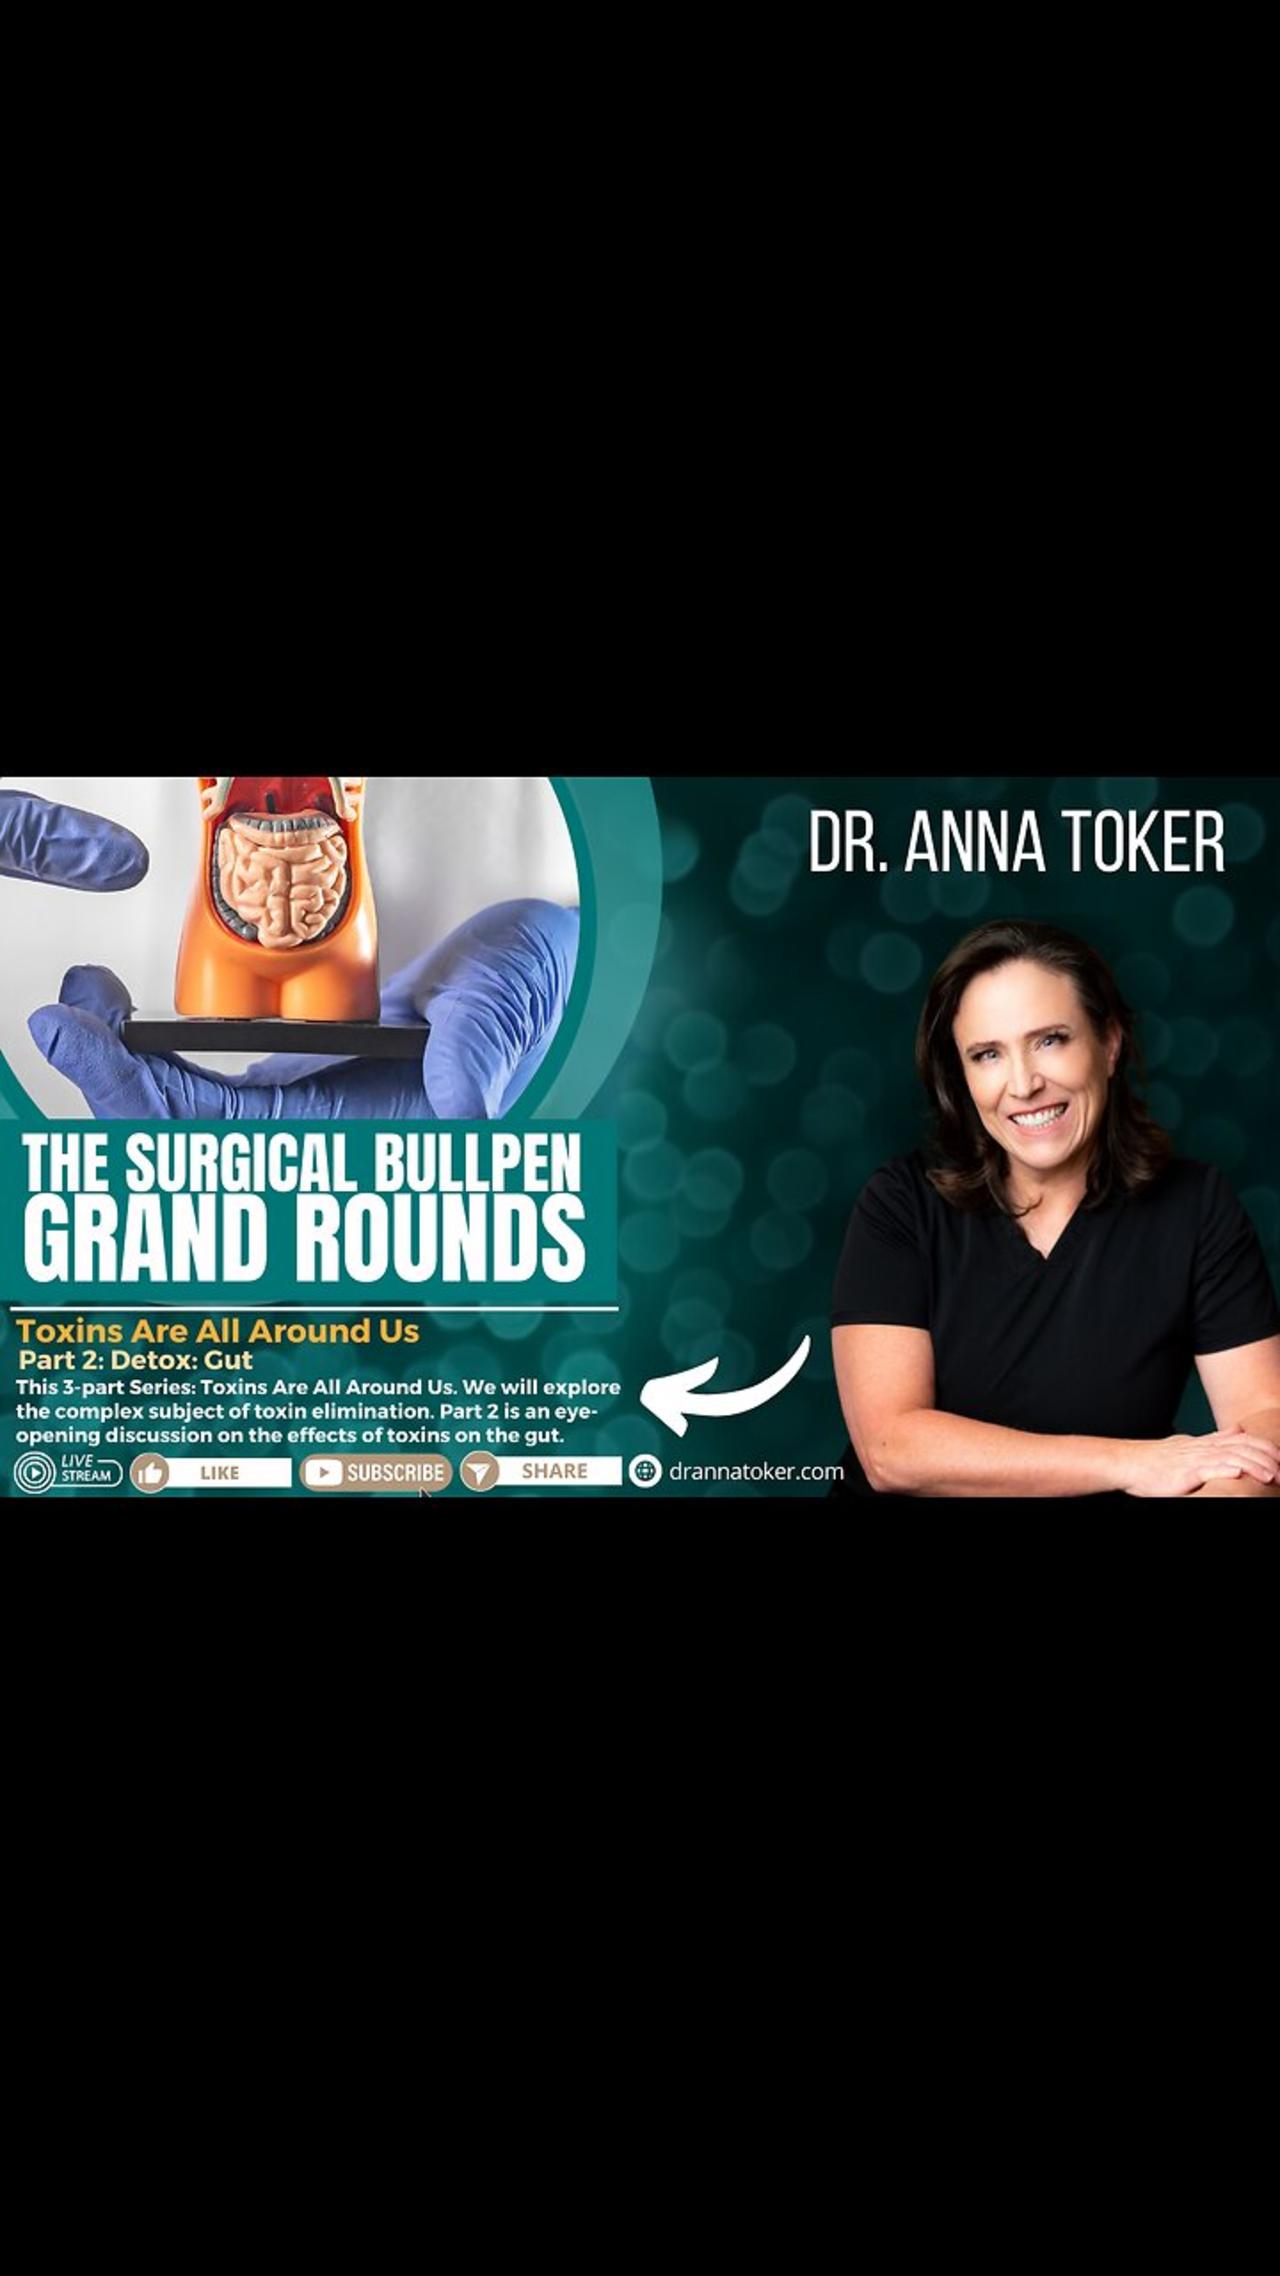 The Surgical Bullpen's Grand Rounds: "Toxins Are All Around Us" - Part 2: Detox the Gut